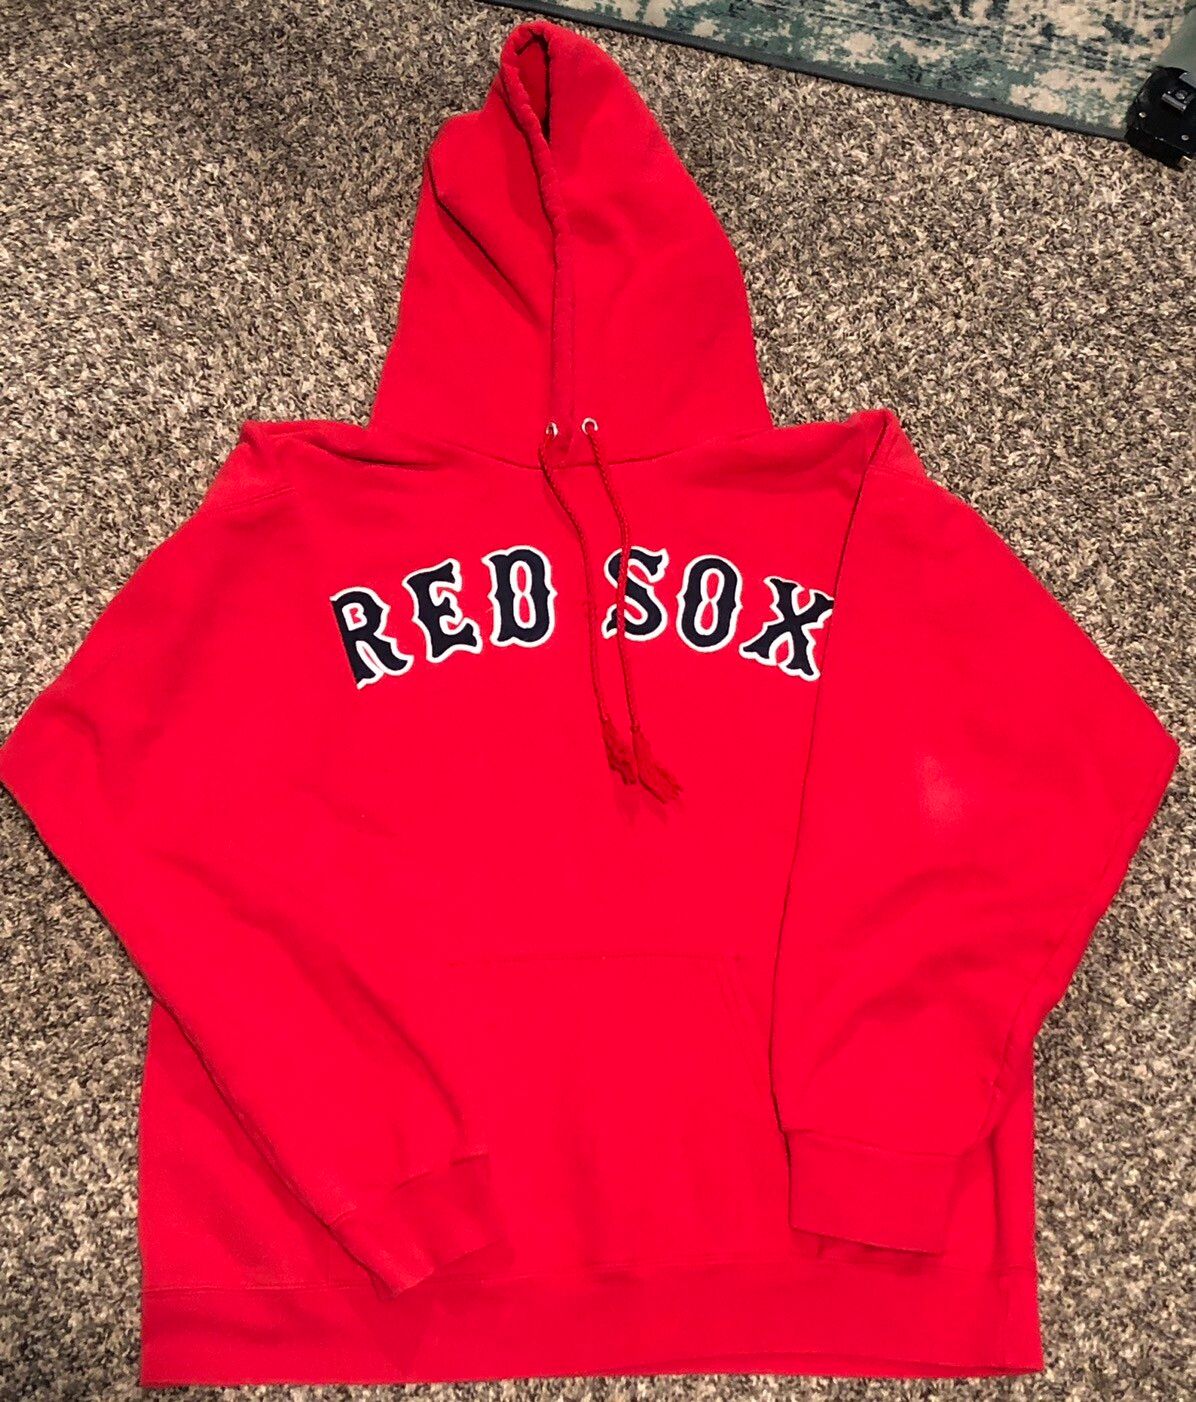 Pre-owned Majestic X Mlb Vintage Boston Red Sox Hoodie